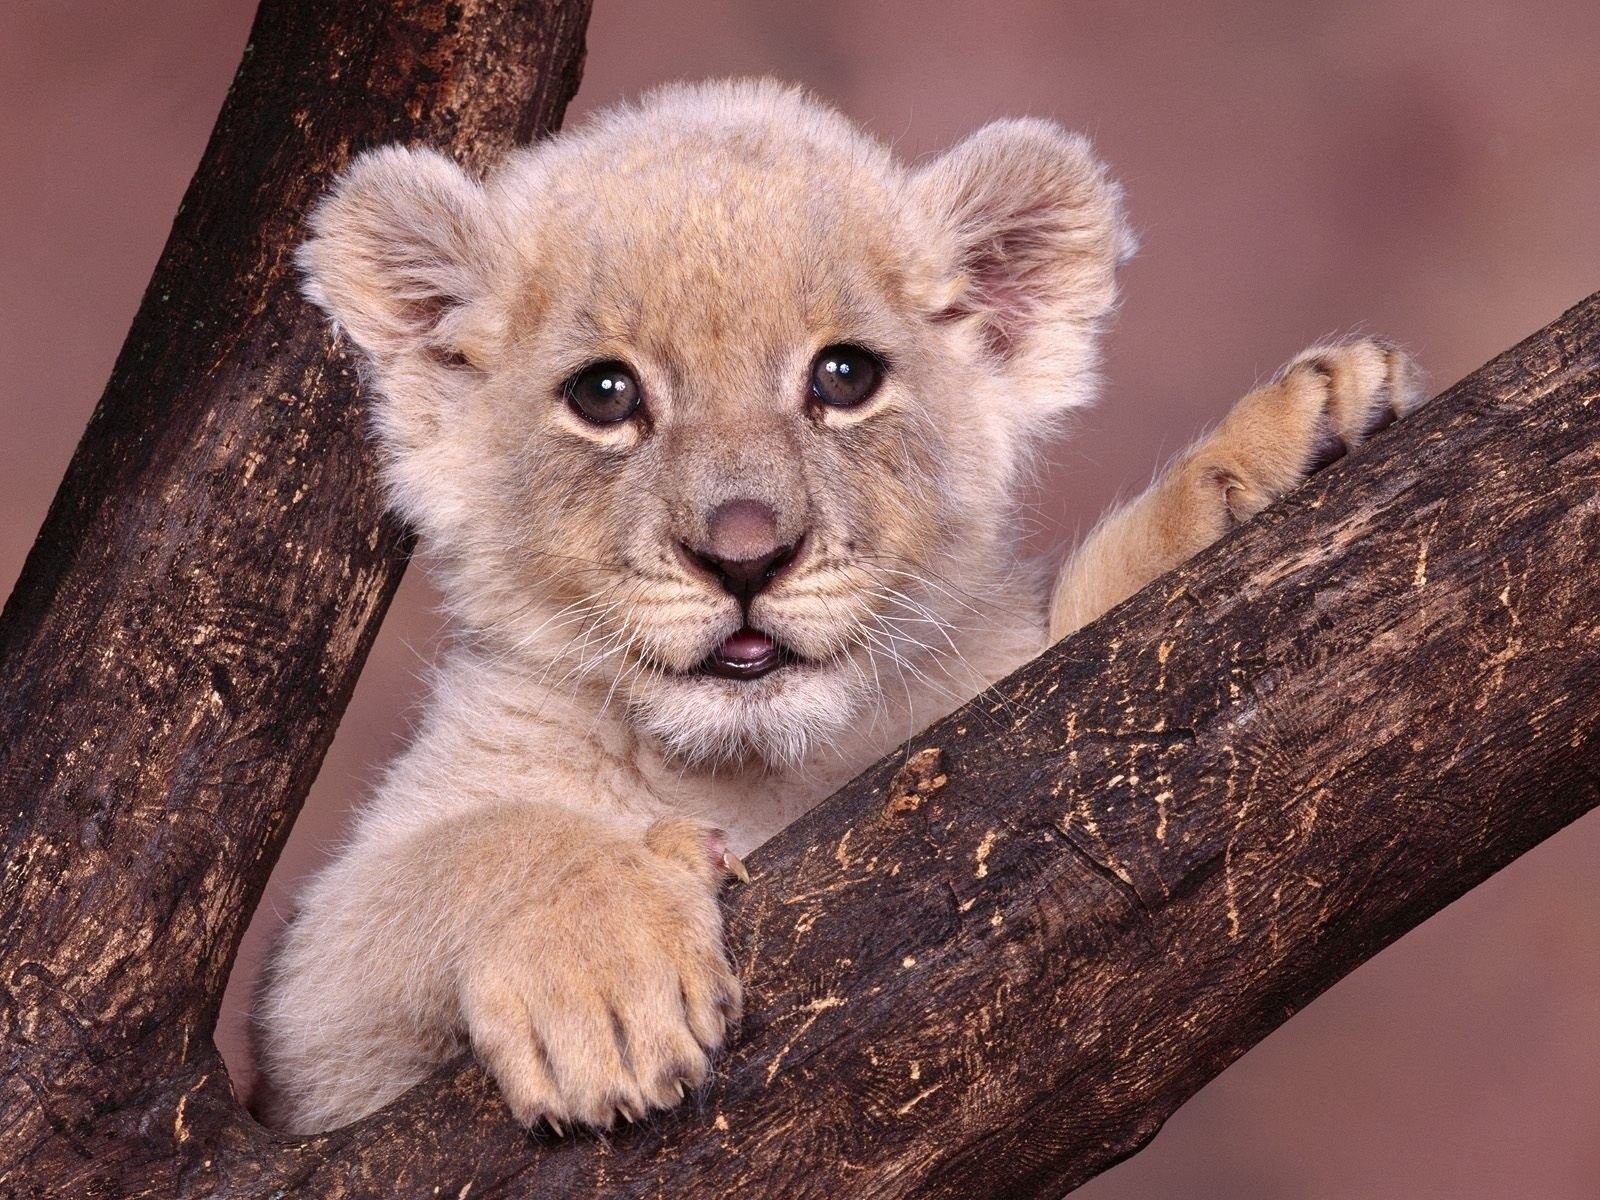 Animals, Animals, Lions, White, Cubs, Baby, Lions